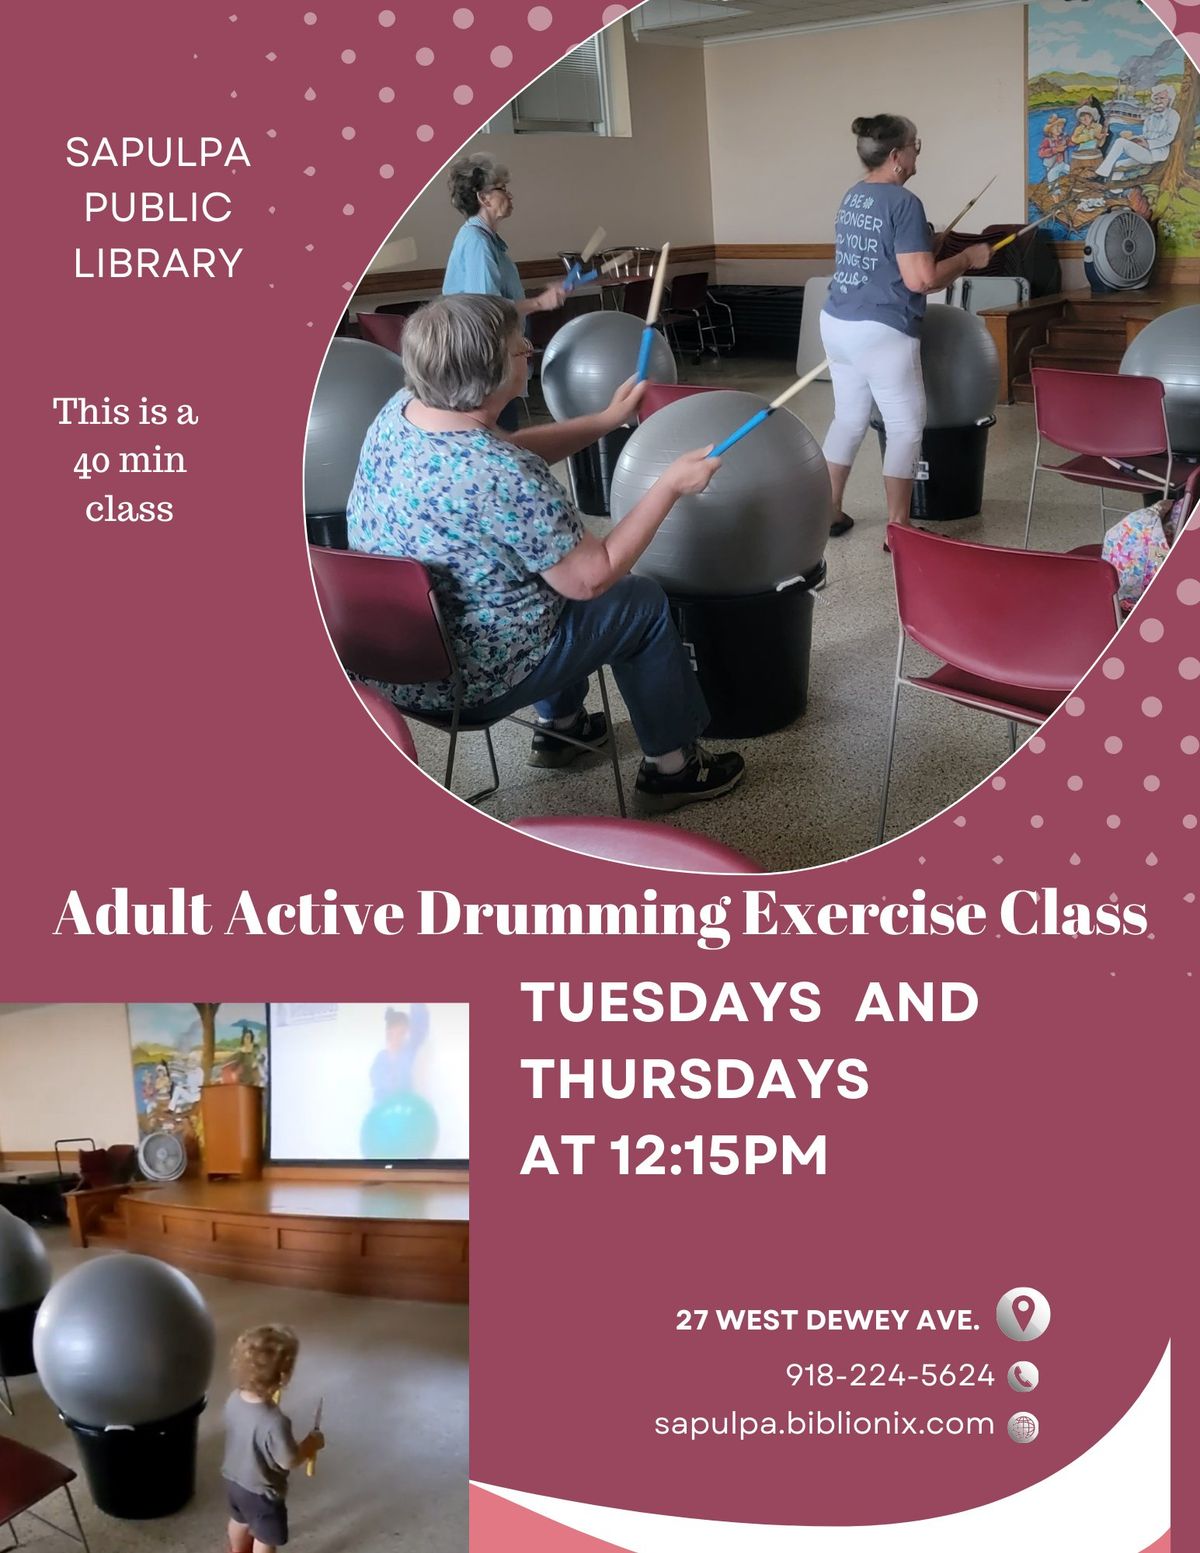 Drumming exercise class